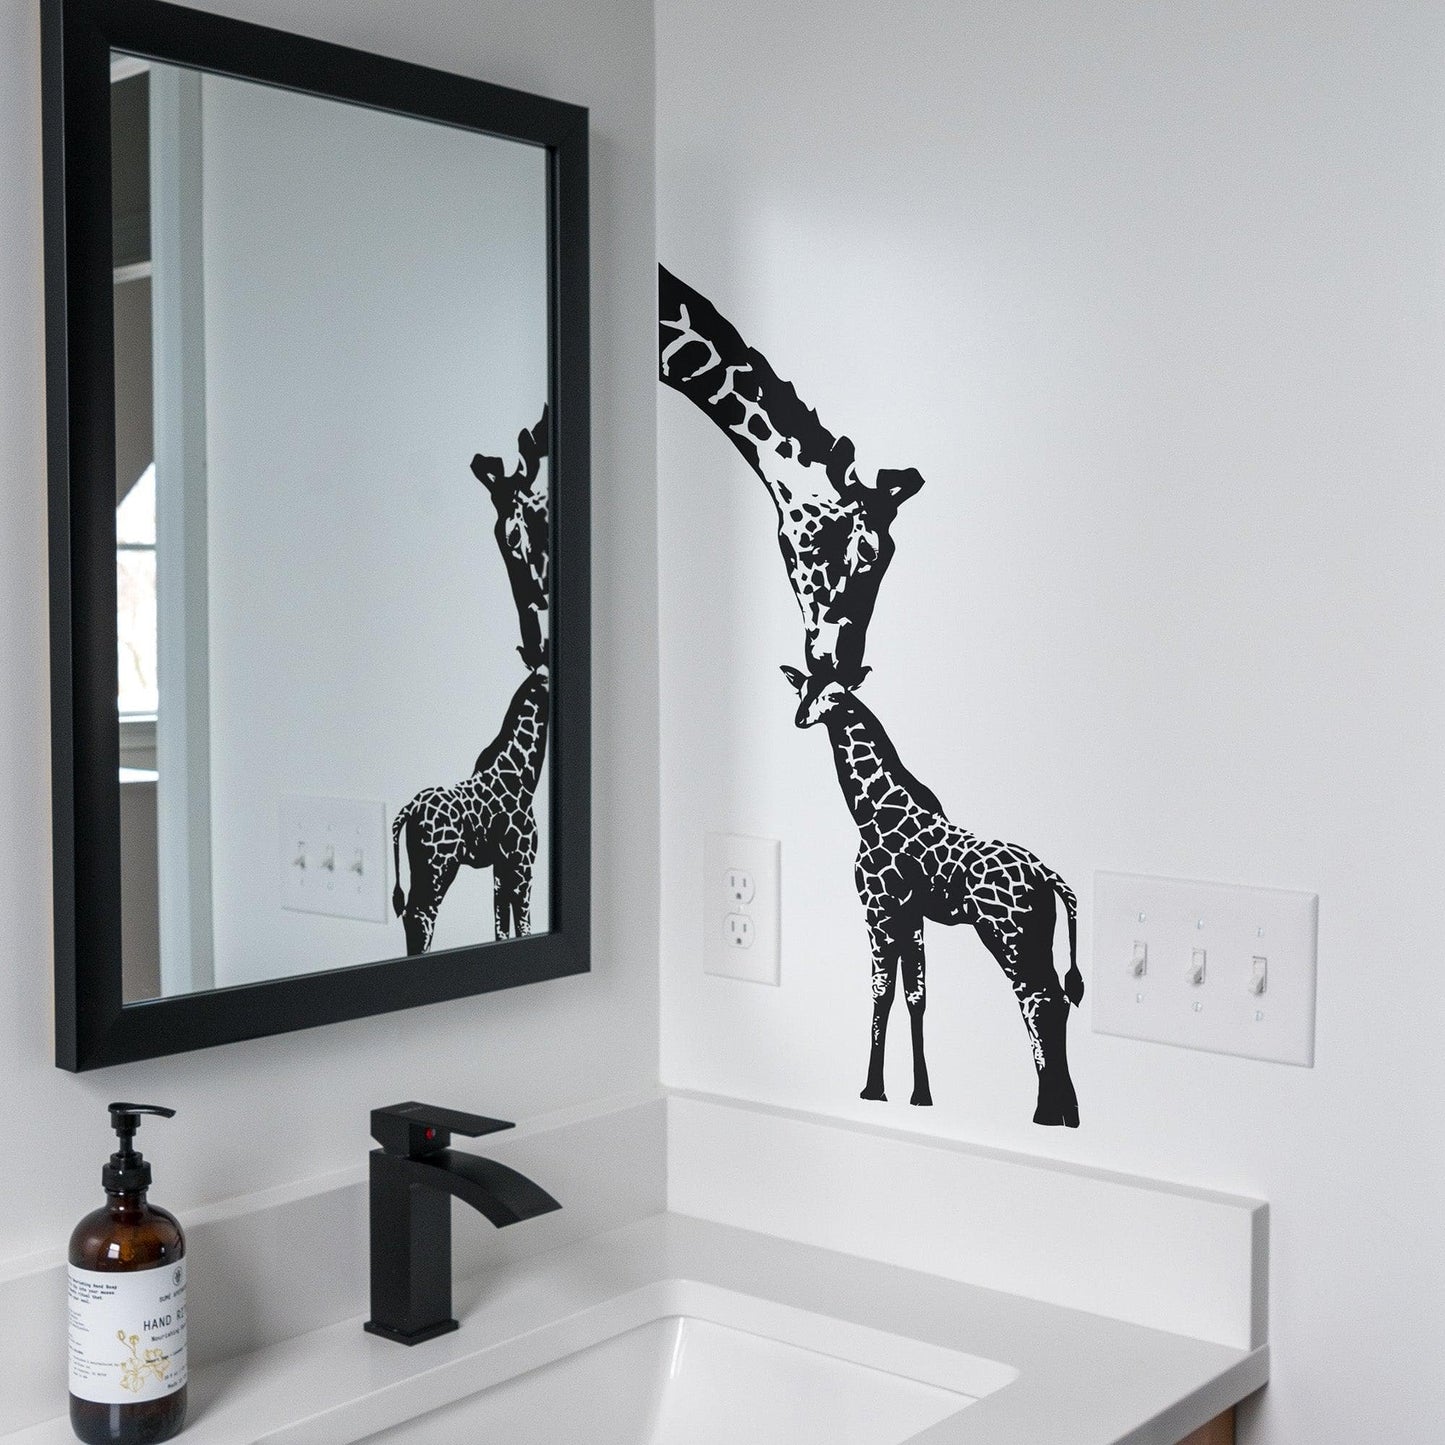 A black adult giraffe and a young giraffe decal on a white wall in a bathroom.